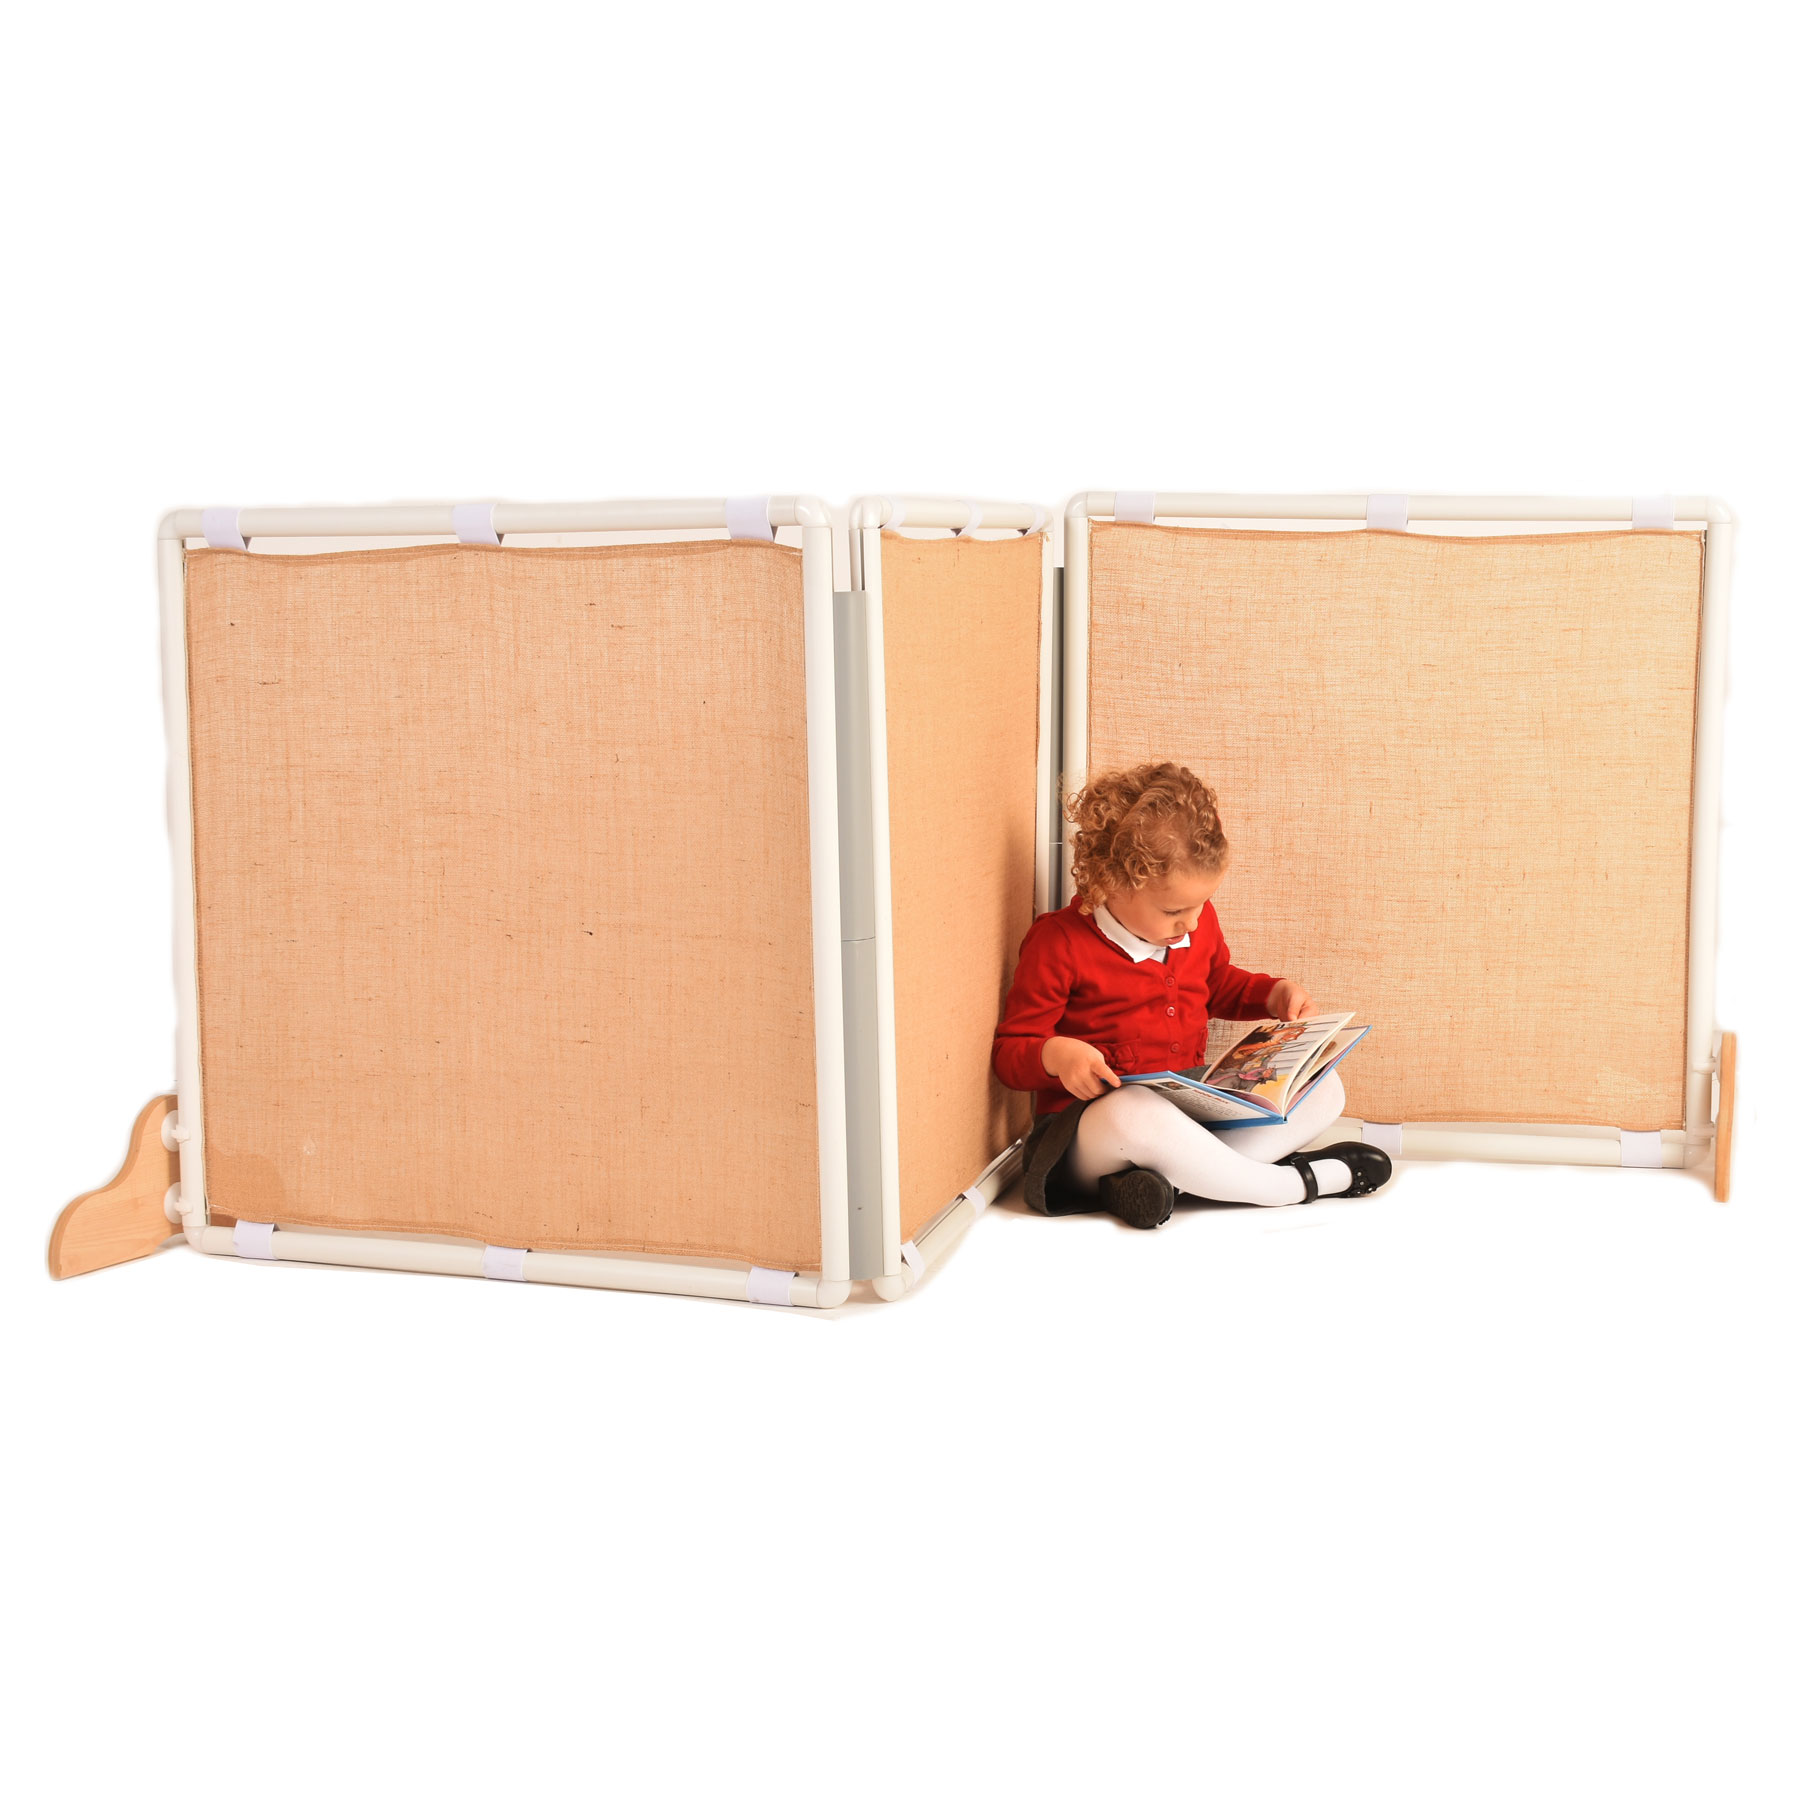 Classroom Dividers & Play Panels